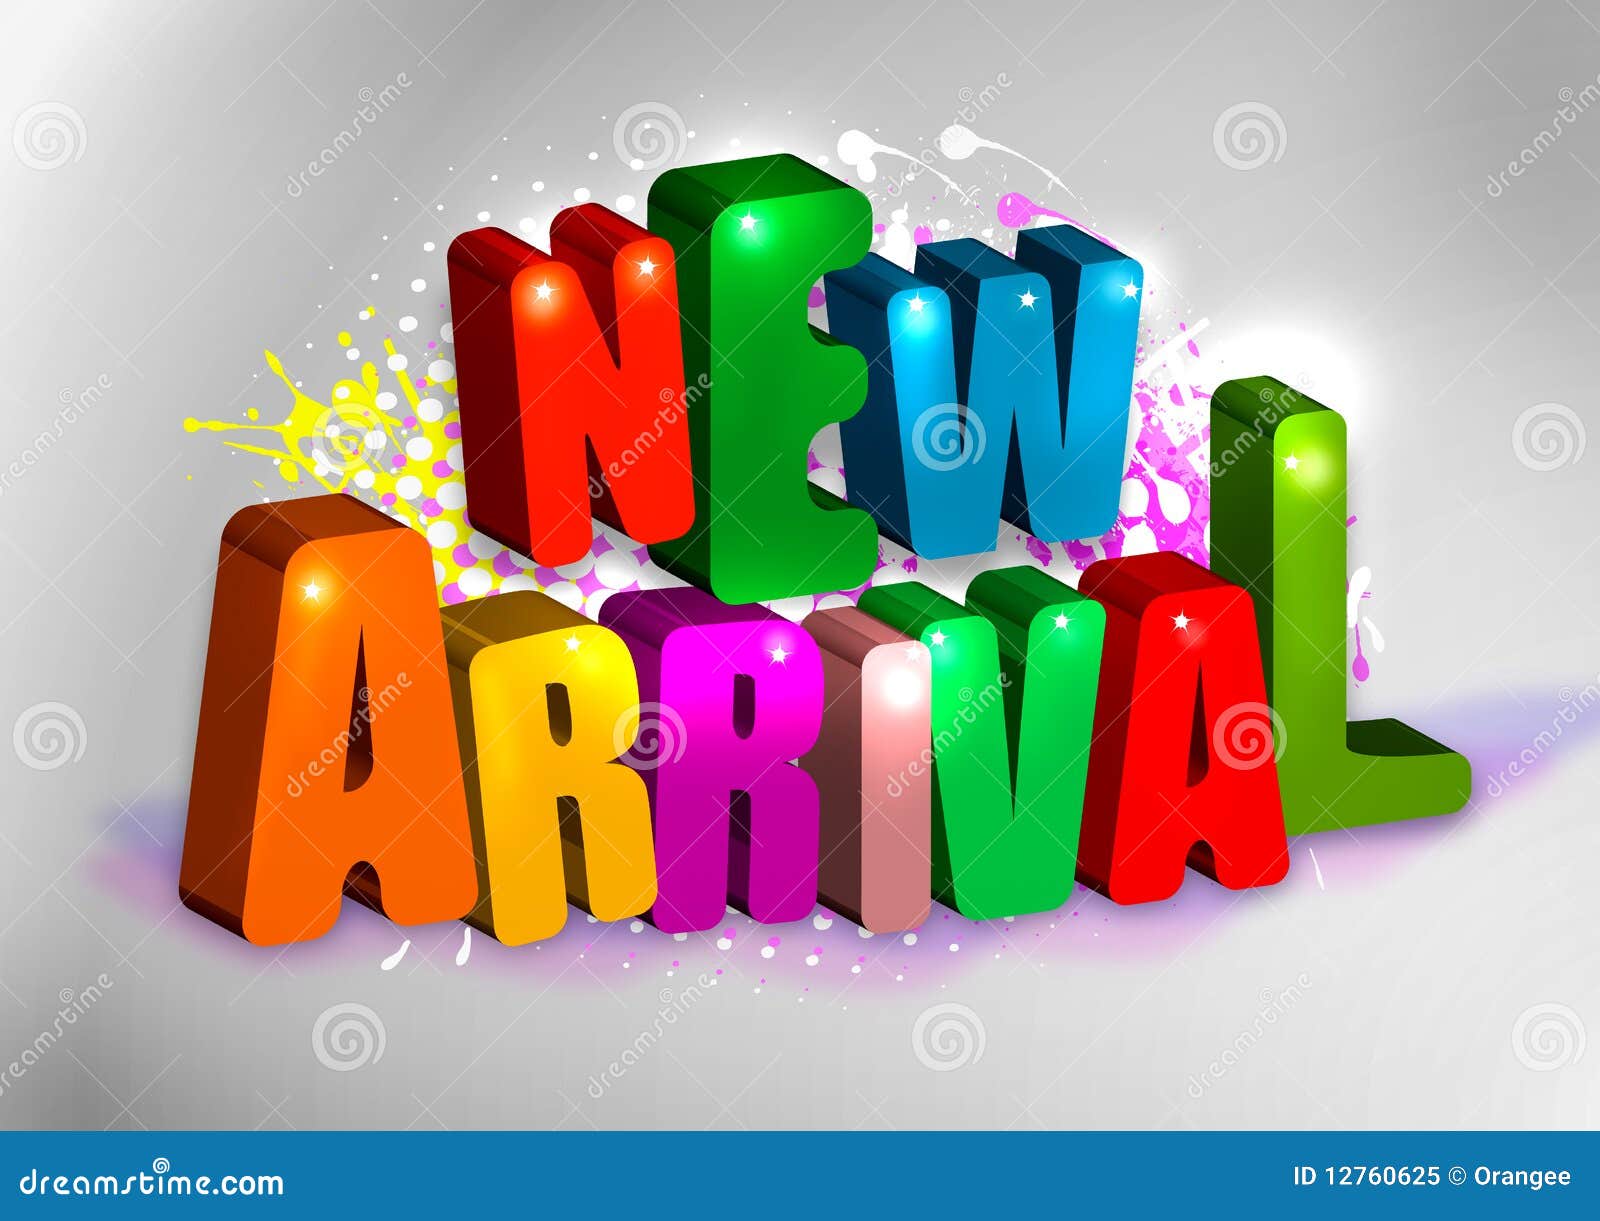 new arrival clipart - photo #2